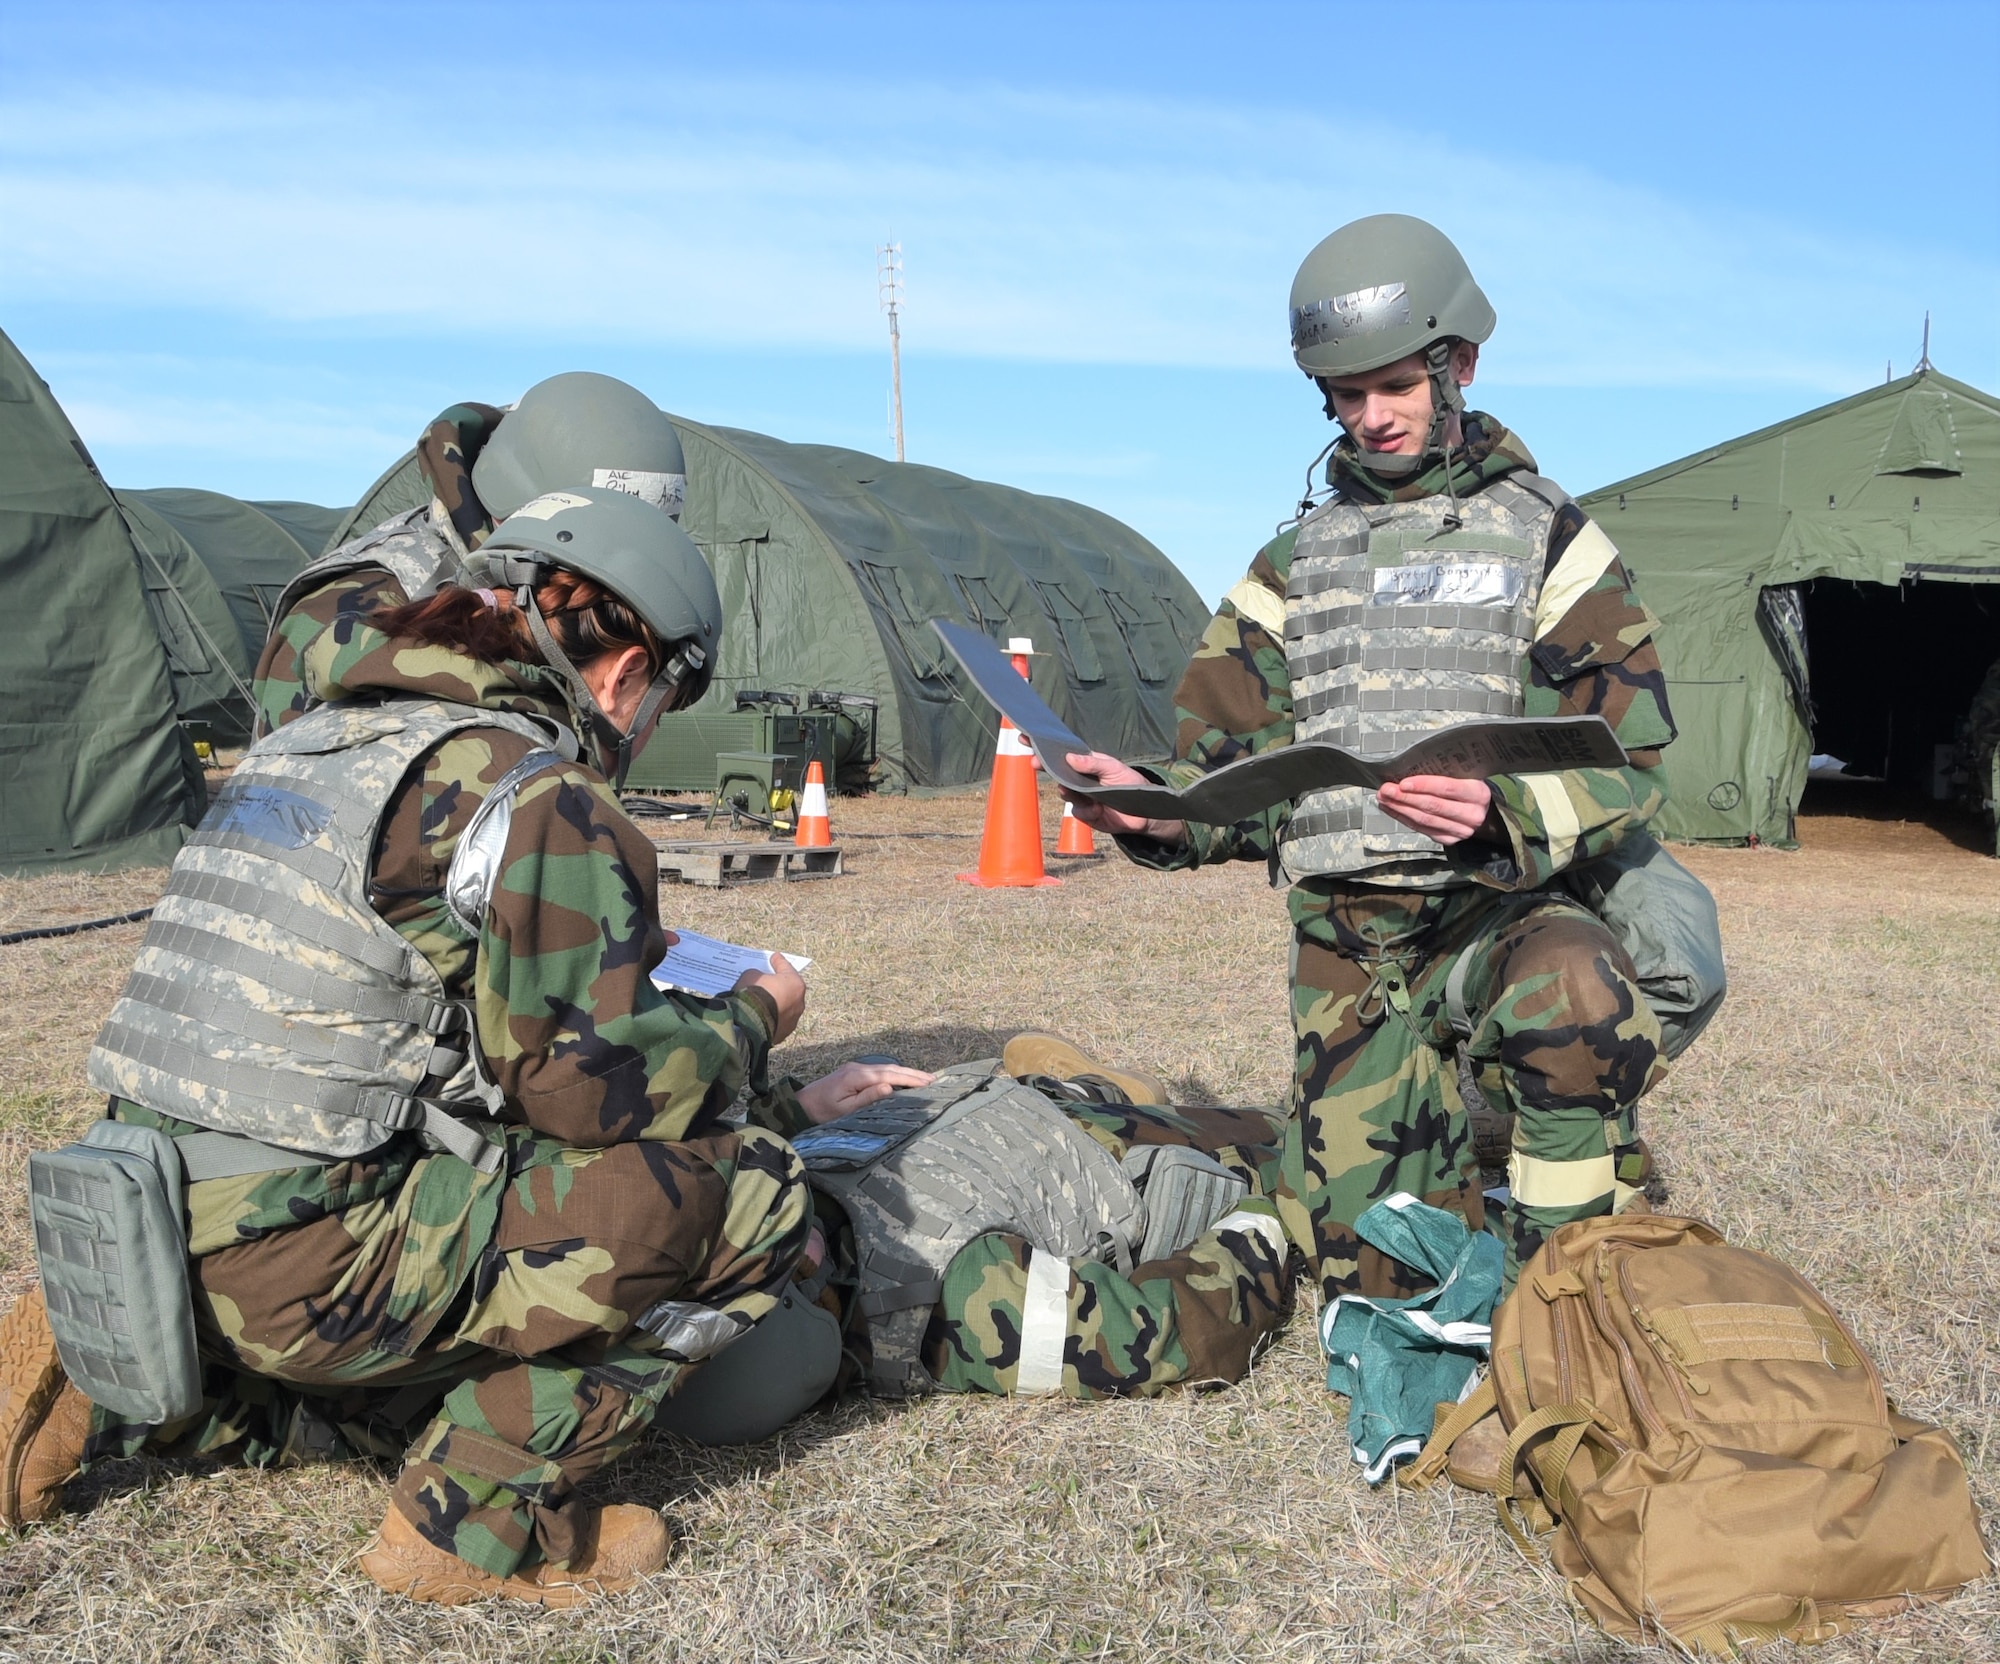 Airmen from the 931st Air Refueling Wing examine a "wounded" exercise participant March 5.